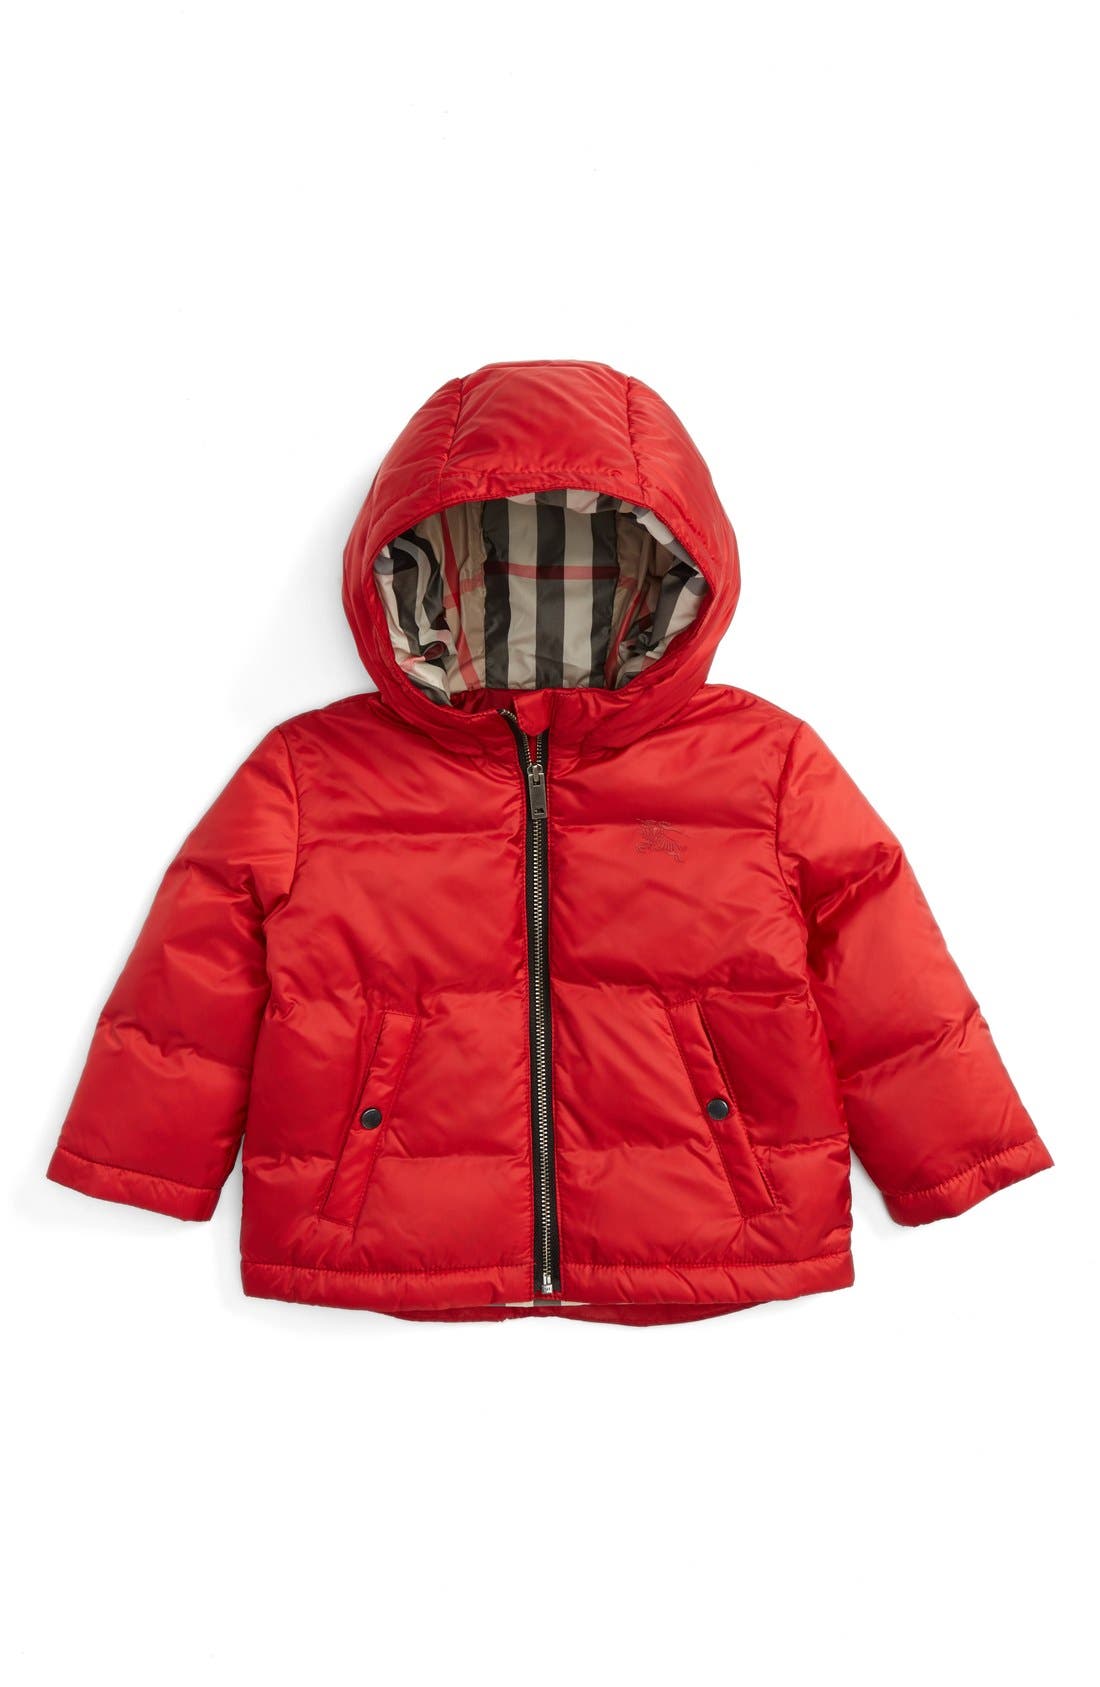 burberry jacket for baby girl